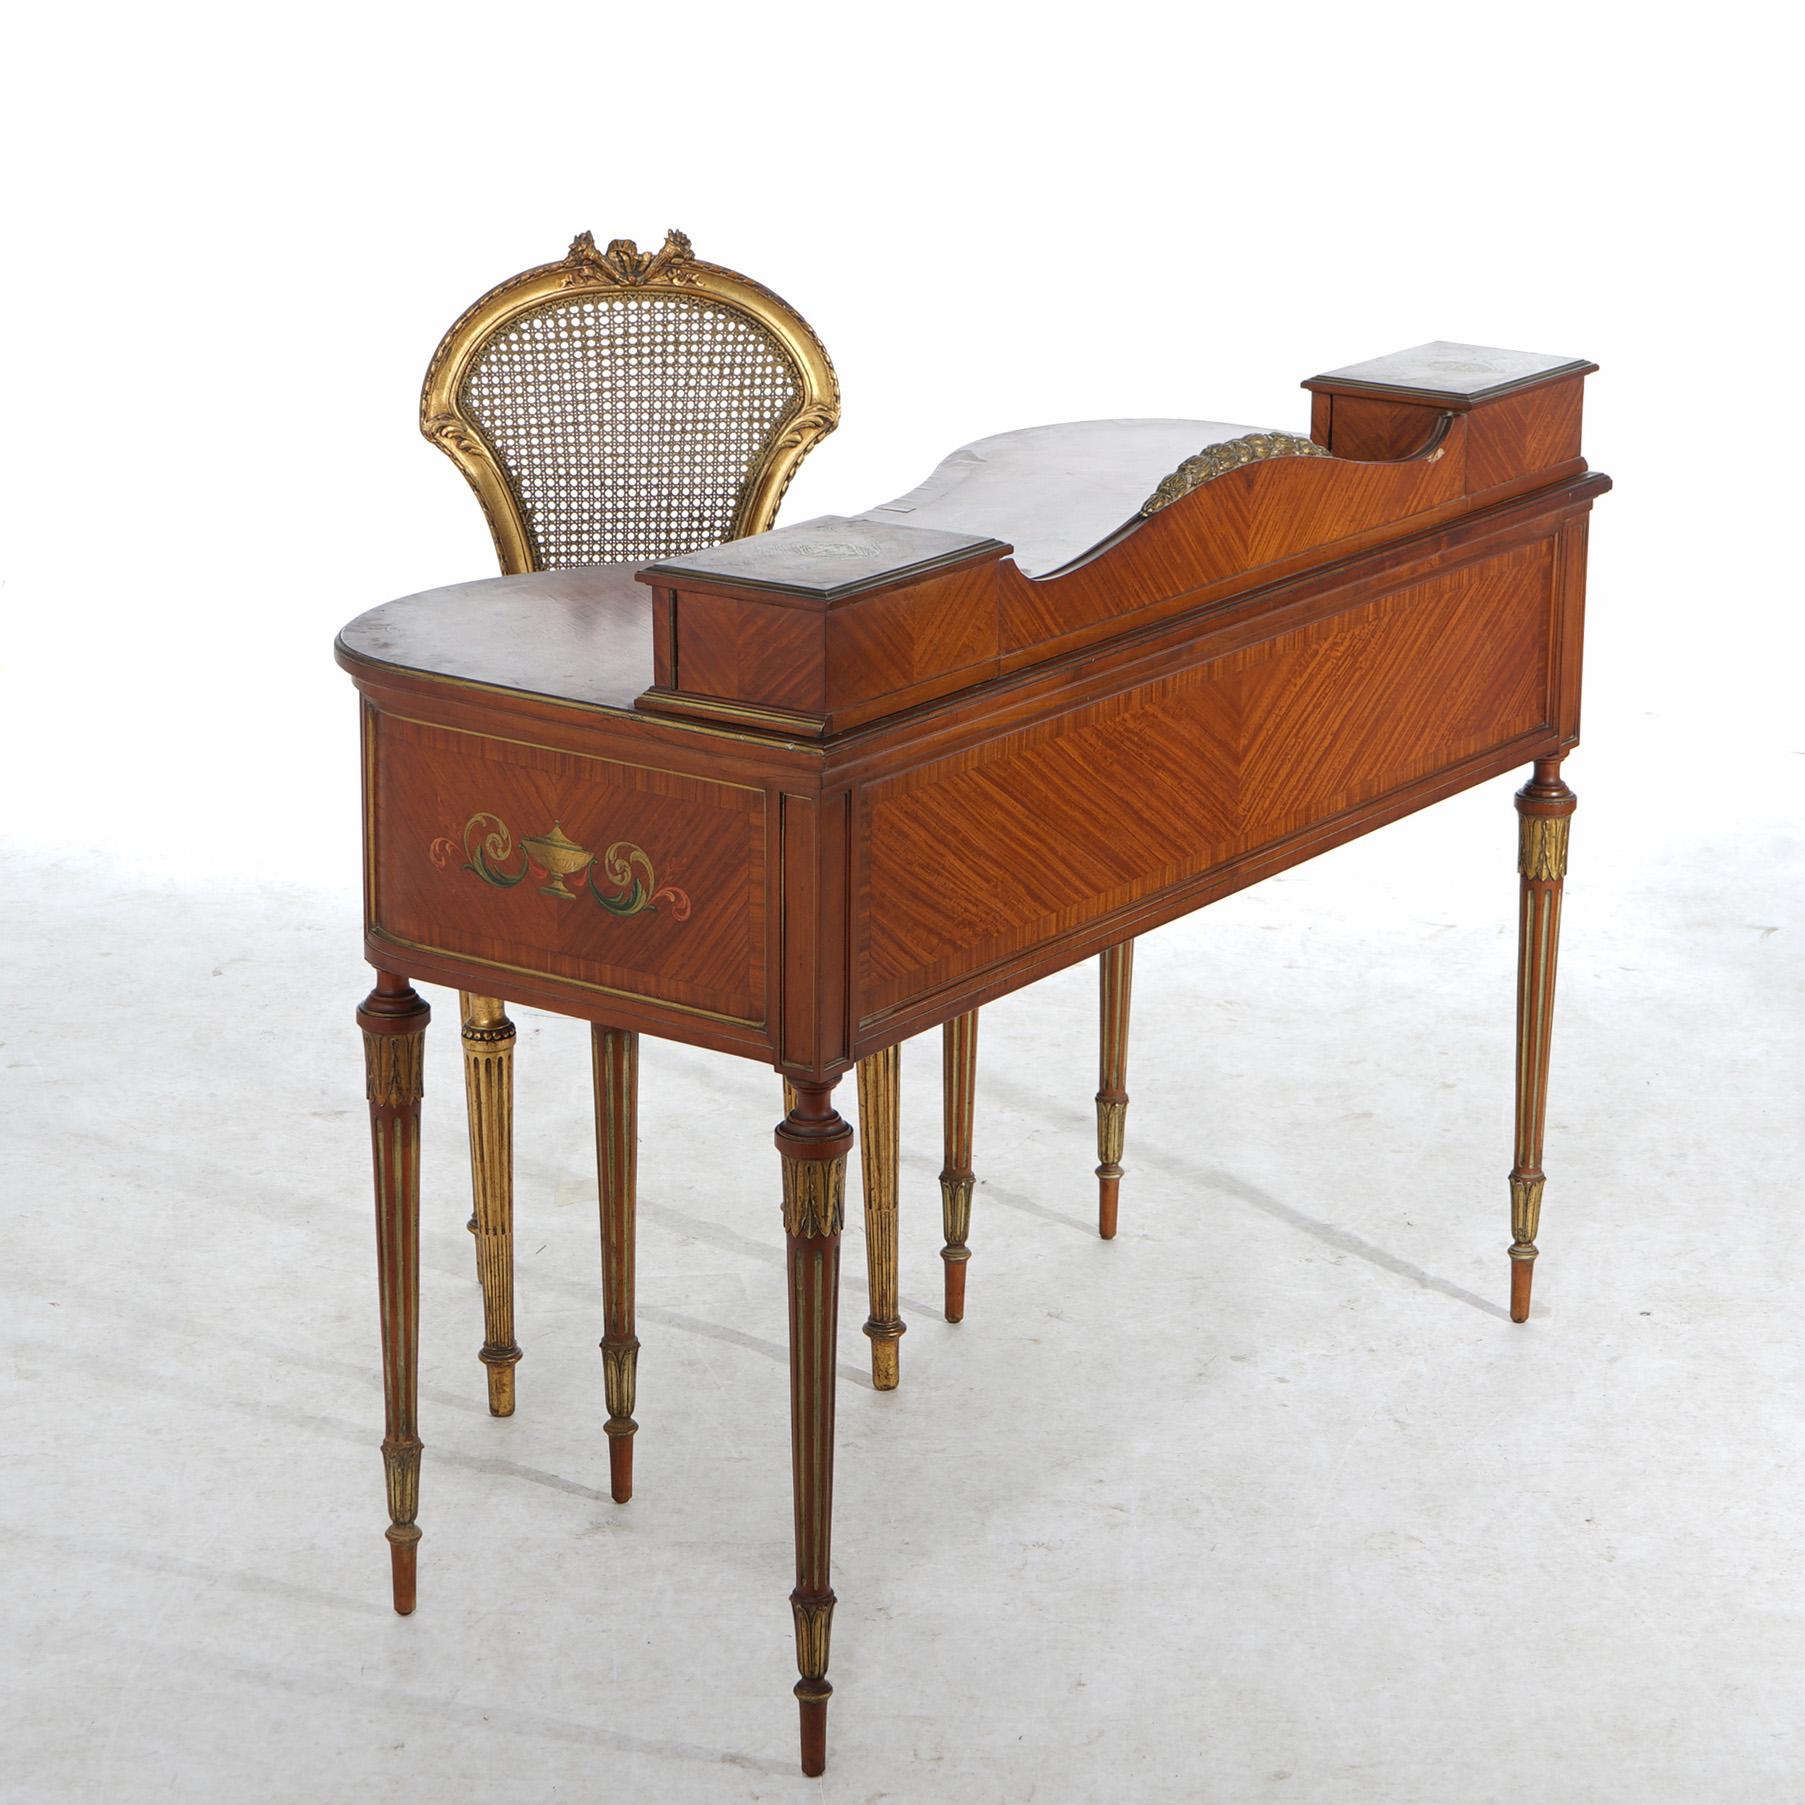 Antique French Style Adams Decorated Satinwood Vanity & Chair Circa 1900 12